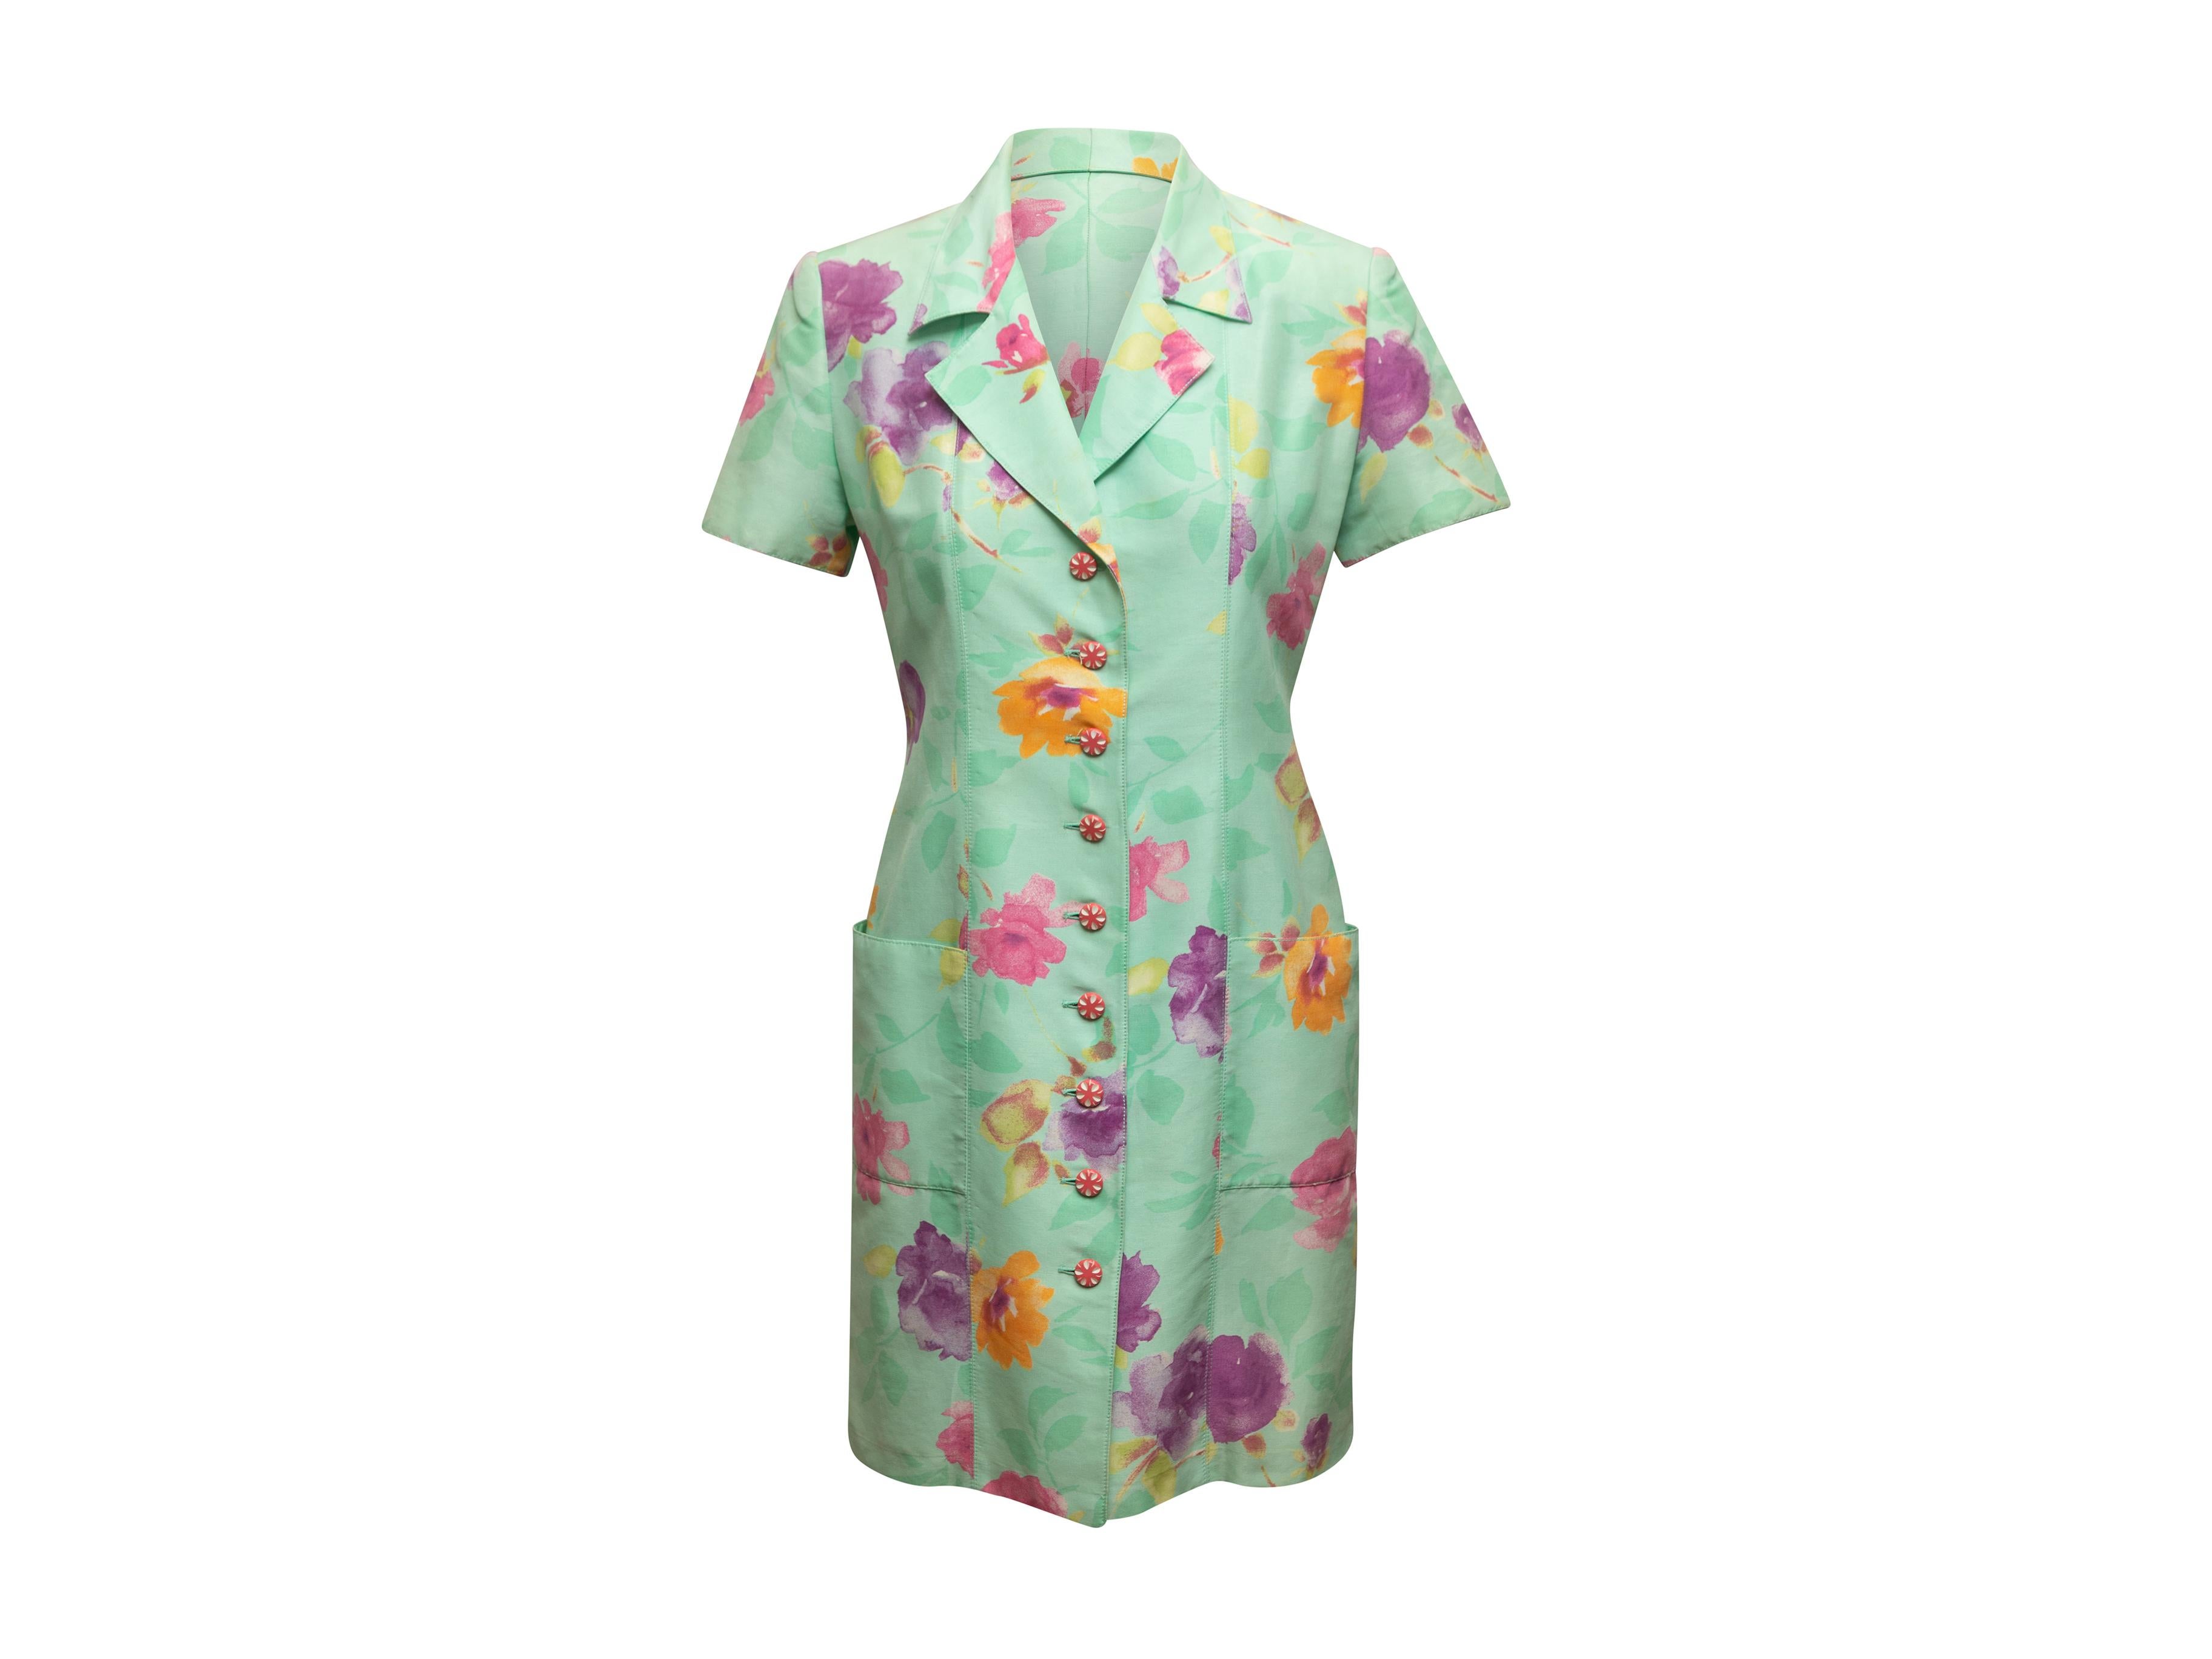 Product details: Vintage mint and multicolor floral print dress by Emanuel Ungaro. Notched collar. Short sleeves. Dual hip pockets. Button closures at center front. 36